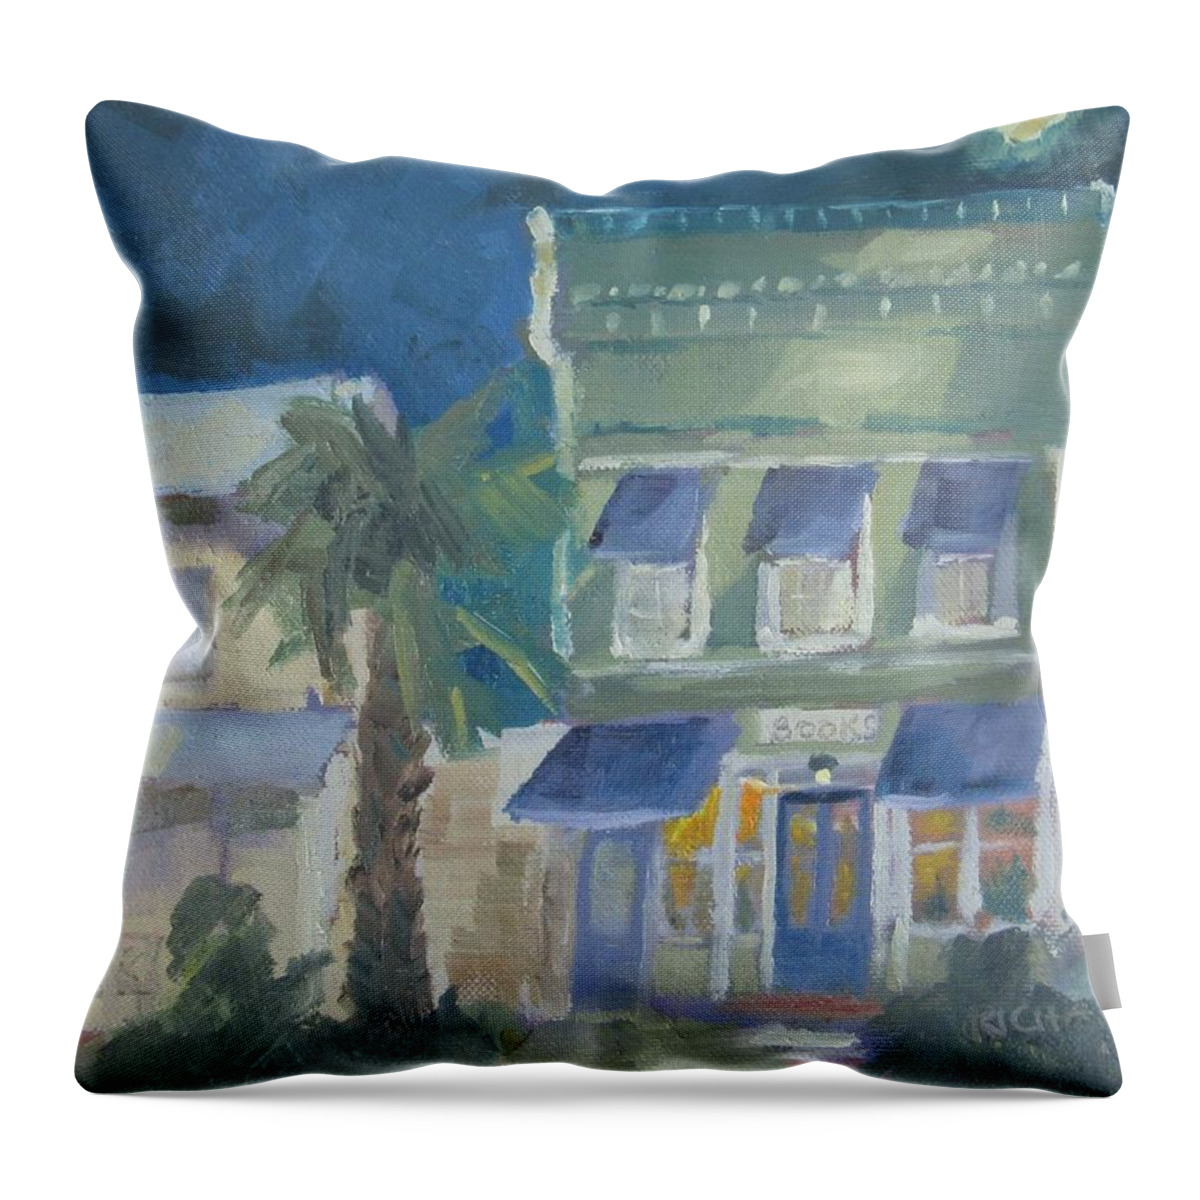 Apalachicola Throw Pillow featuring the painting Downtown Books Three by Susan Richardson